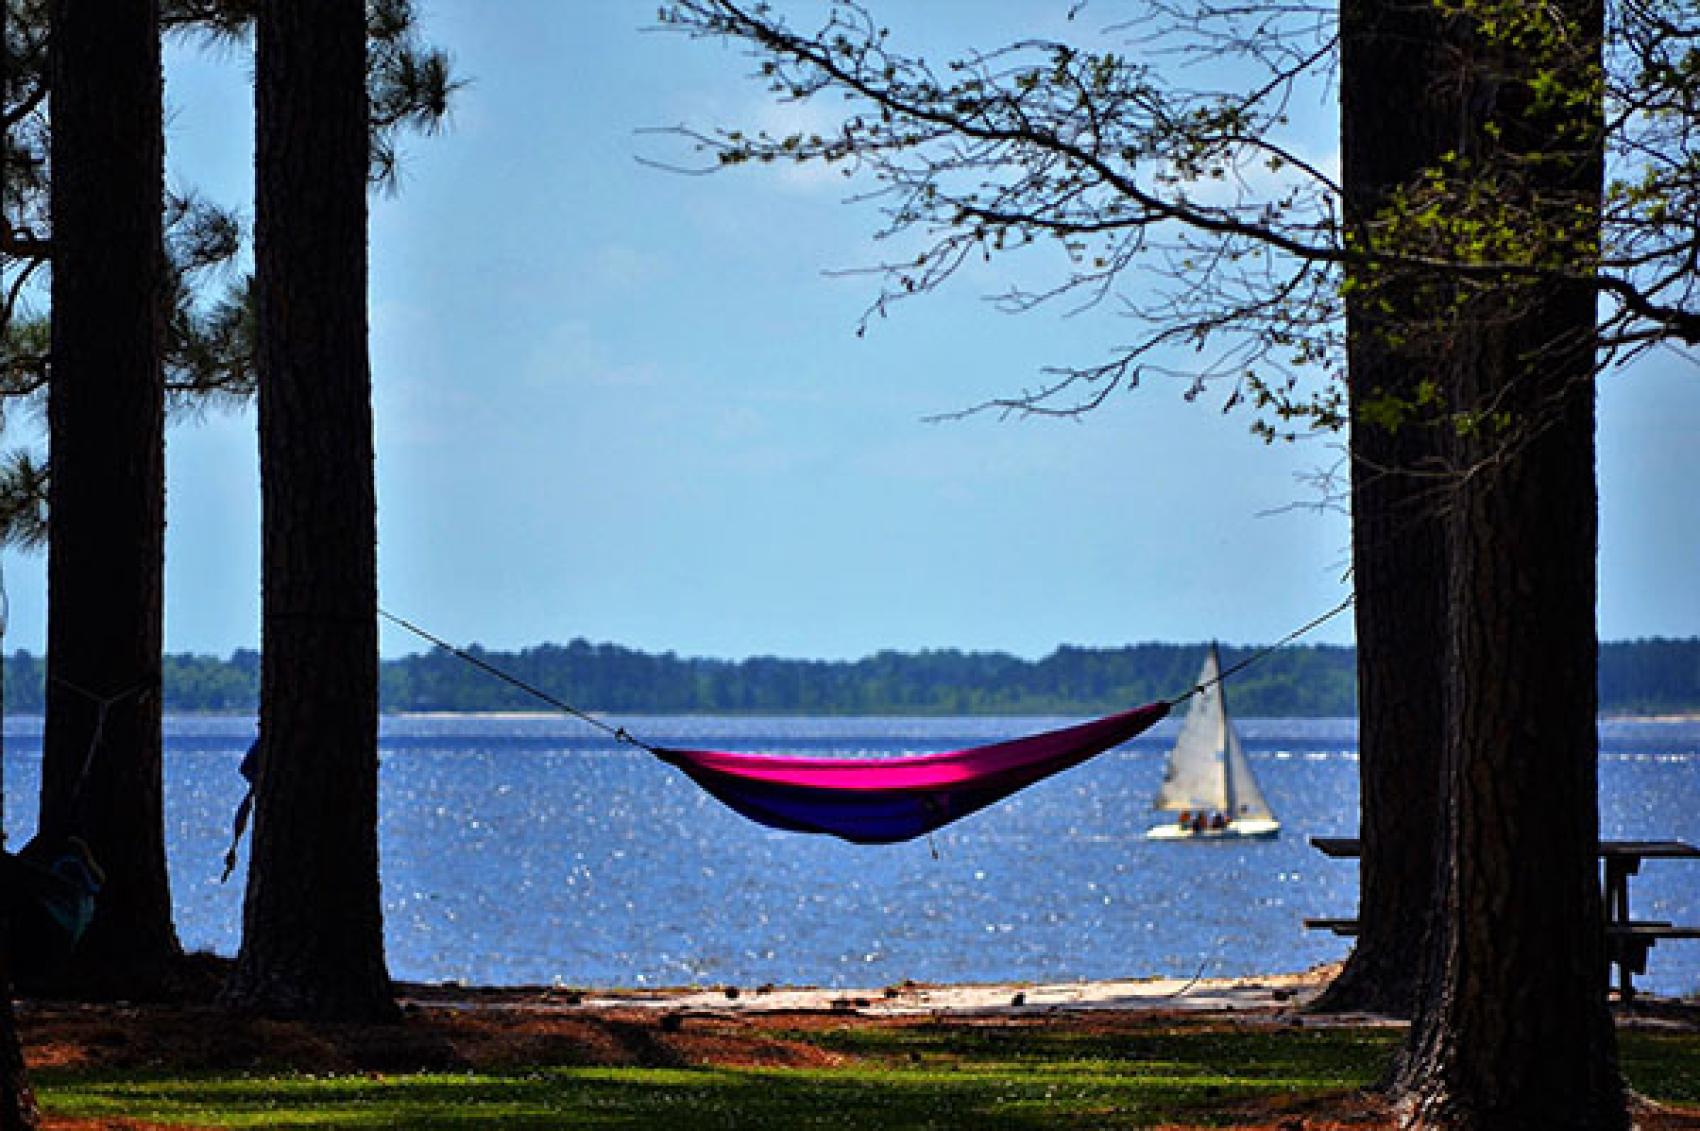 hammock with lake in background